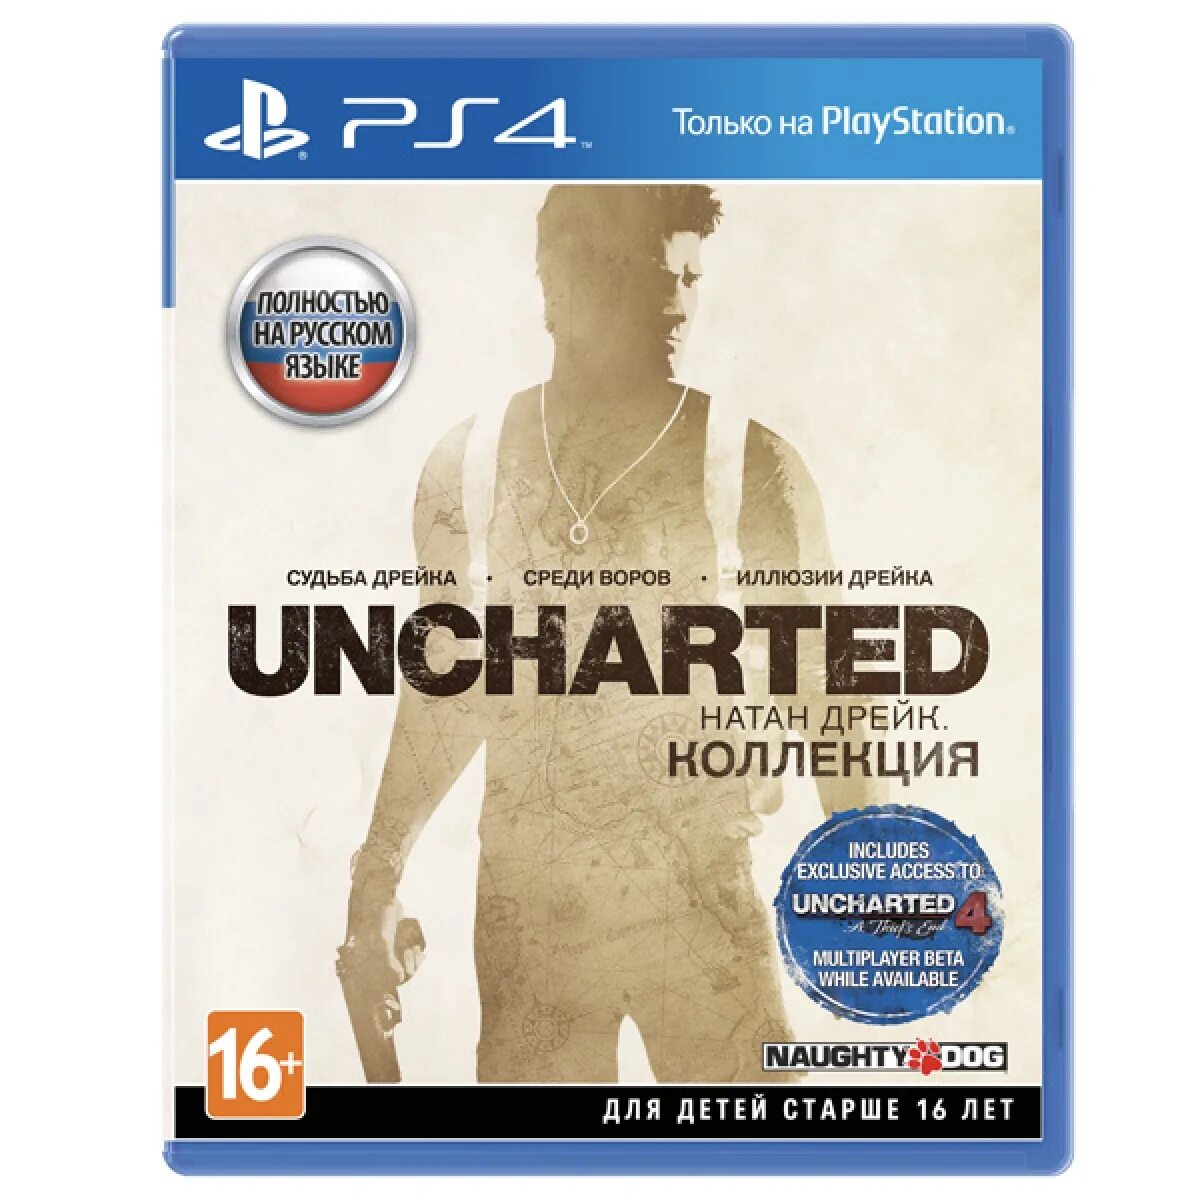 Uncharted collection ps4.